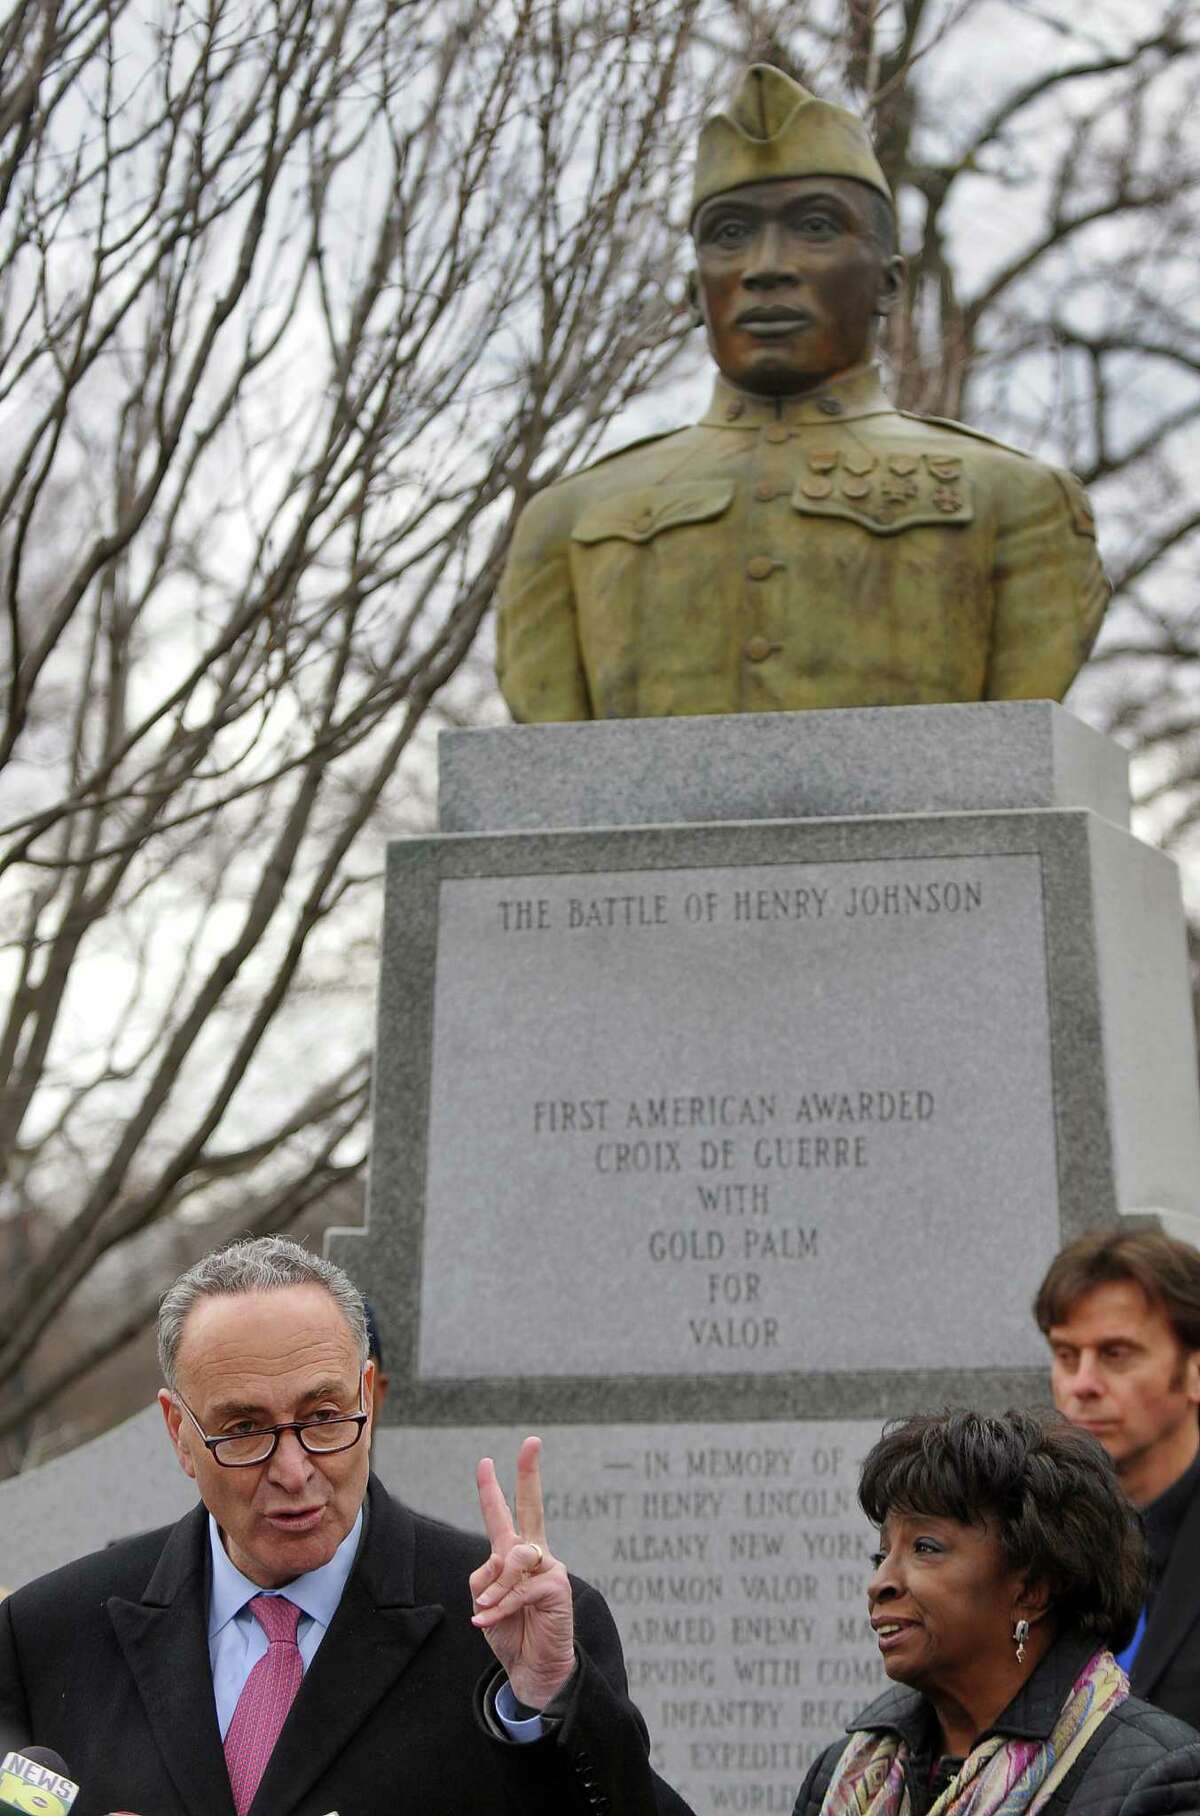 U.S. Senator Charles E. Schumer announces that newly discovered documents will enhance Sgt. Henry Johnson's chance of receiving the Medal of Honor, at the World War I hero's statue in Washington Park on Tuesday March 22, 2011 in Albany, NY. Albany County Legislators Lucille McKnight and Brian Scavo are at right. ( Philip Kamrass/ Times Union )